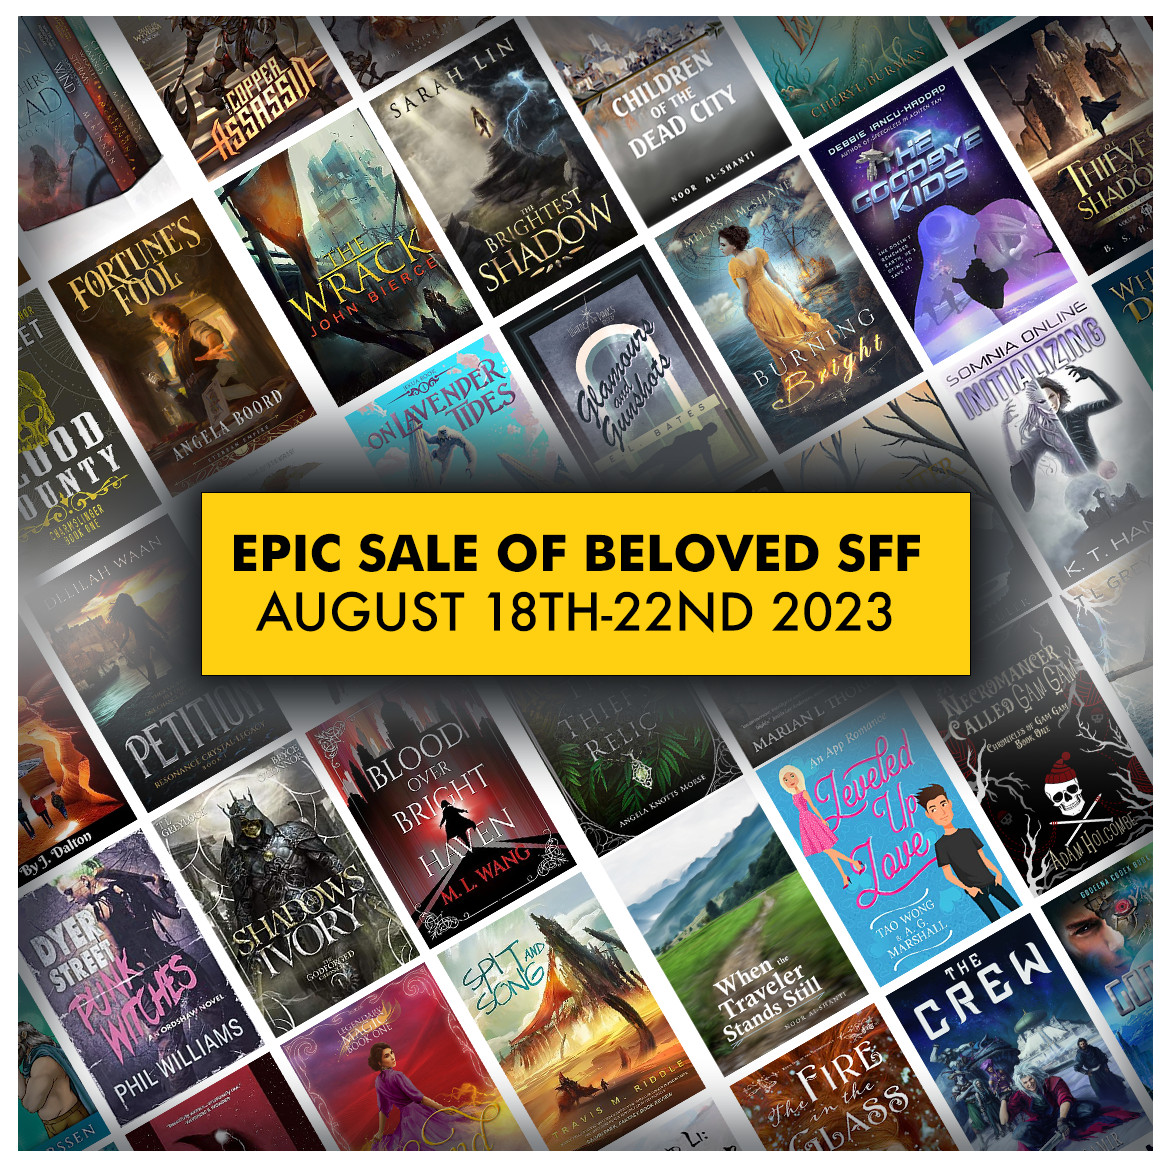 🚨 EPIC #BelovedSFFBooks SALE ALERT!

📚 50+ SFF #indiereads recommended by #indieauthors
⭐️ 15 sub-genres from cozy to dark to LitRPG
🏆 books from #SPFBO winners, finalists, & semi-finalists!
⚔️ 9 #SPFBO9 entries
⏰ Sale runs 18-22 August 2023
🔥 All books $0.99 or less

🔗👇